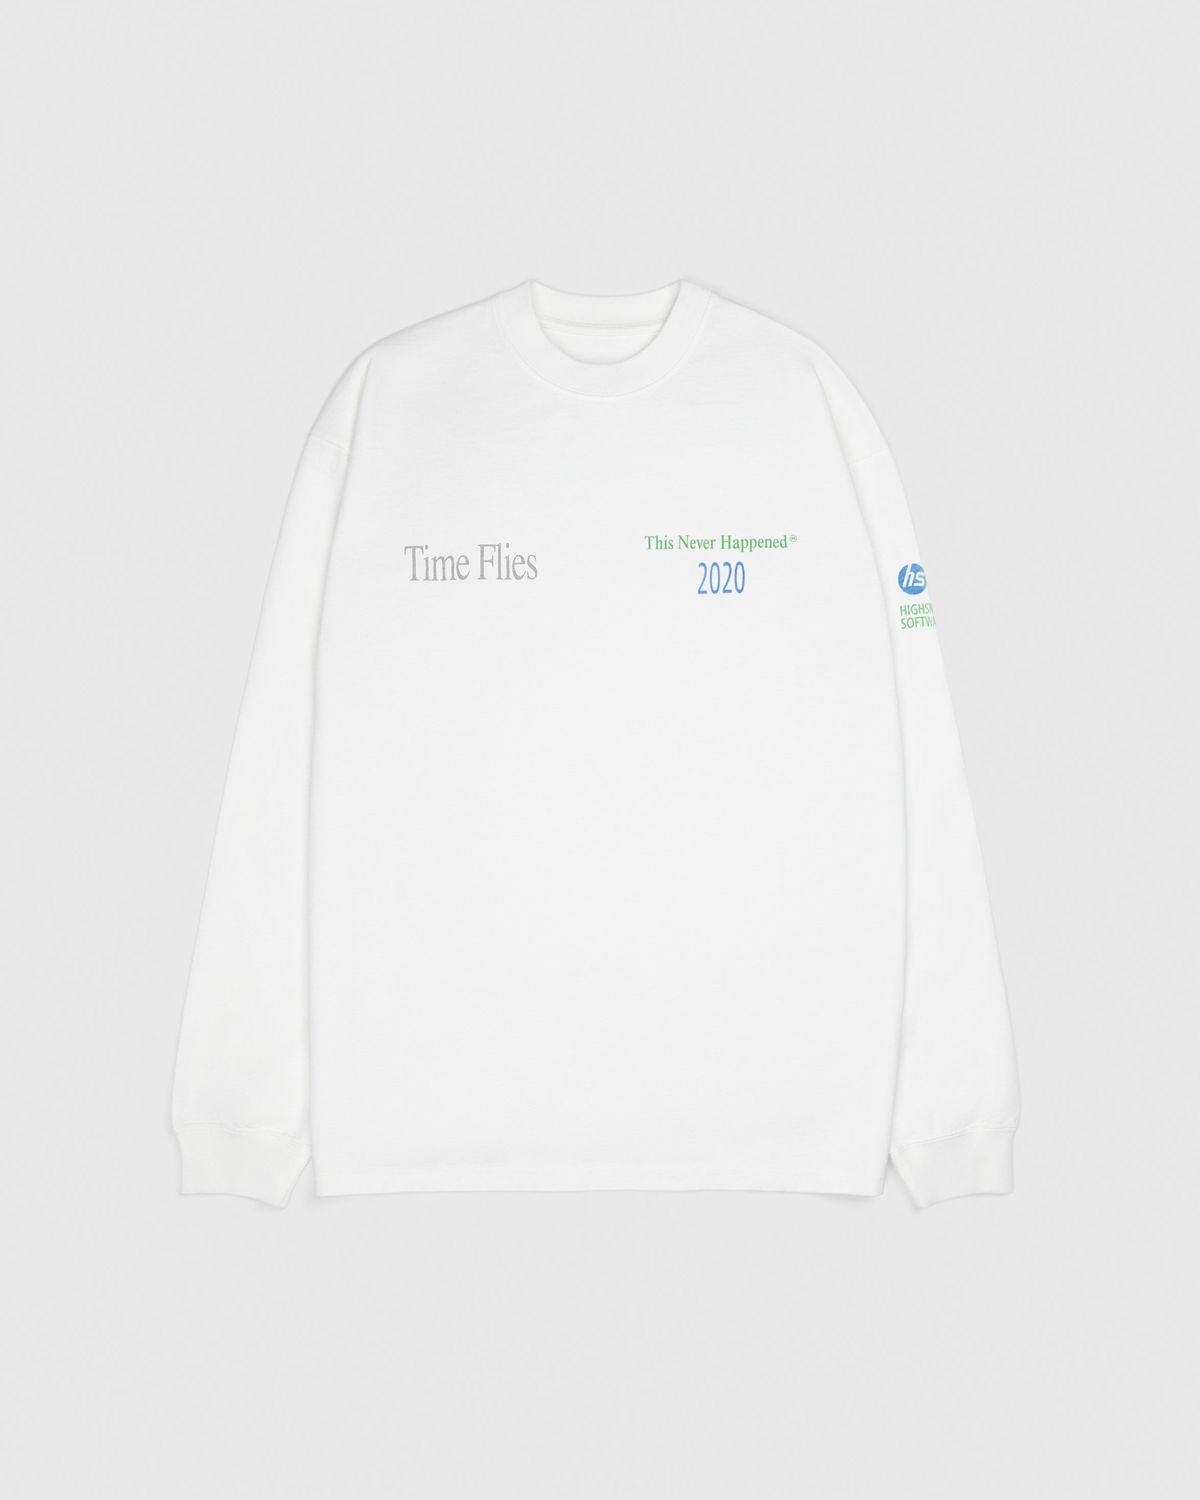 Highsnobiety – This Never Happened Tech Convention T-Shirt White - T-Shirts - White - Image 2